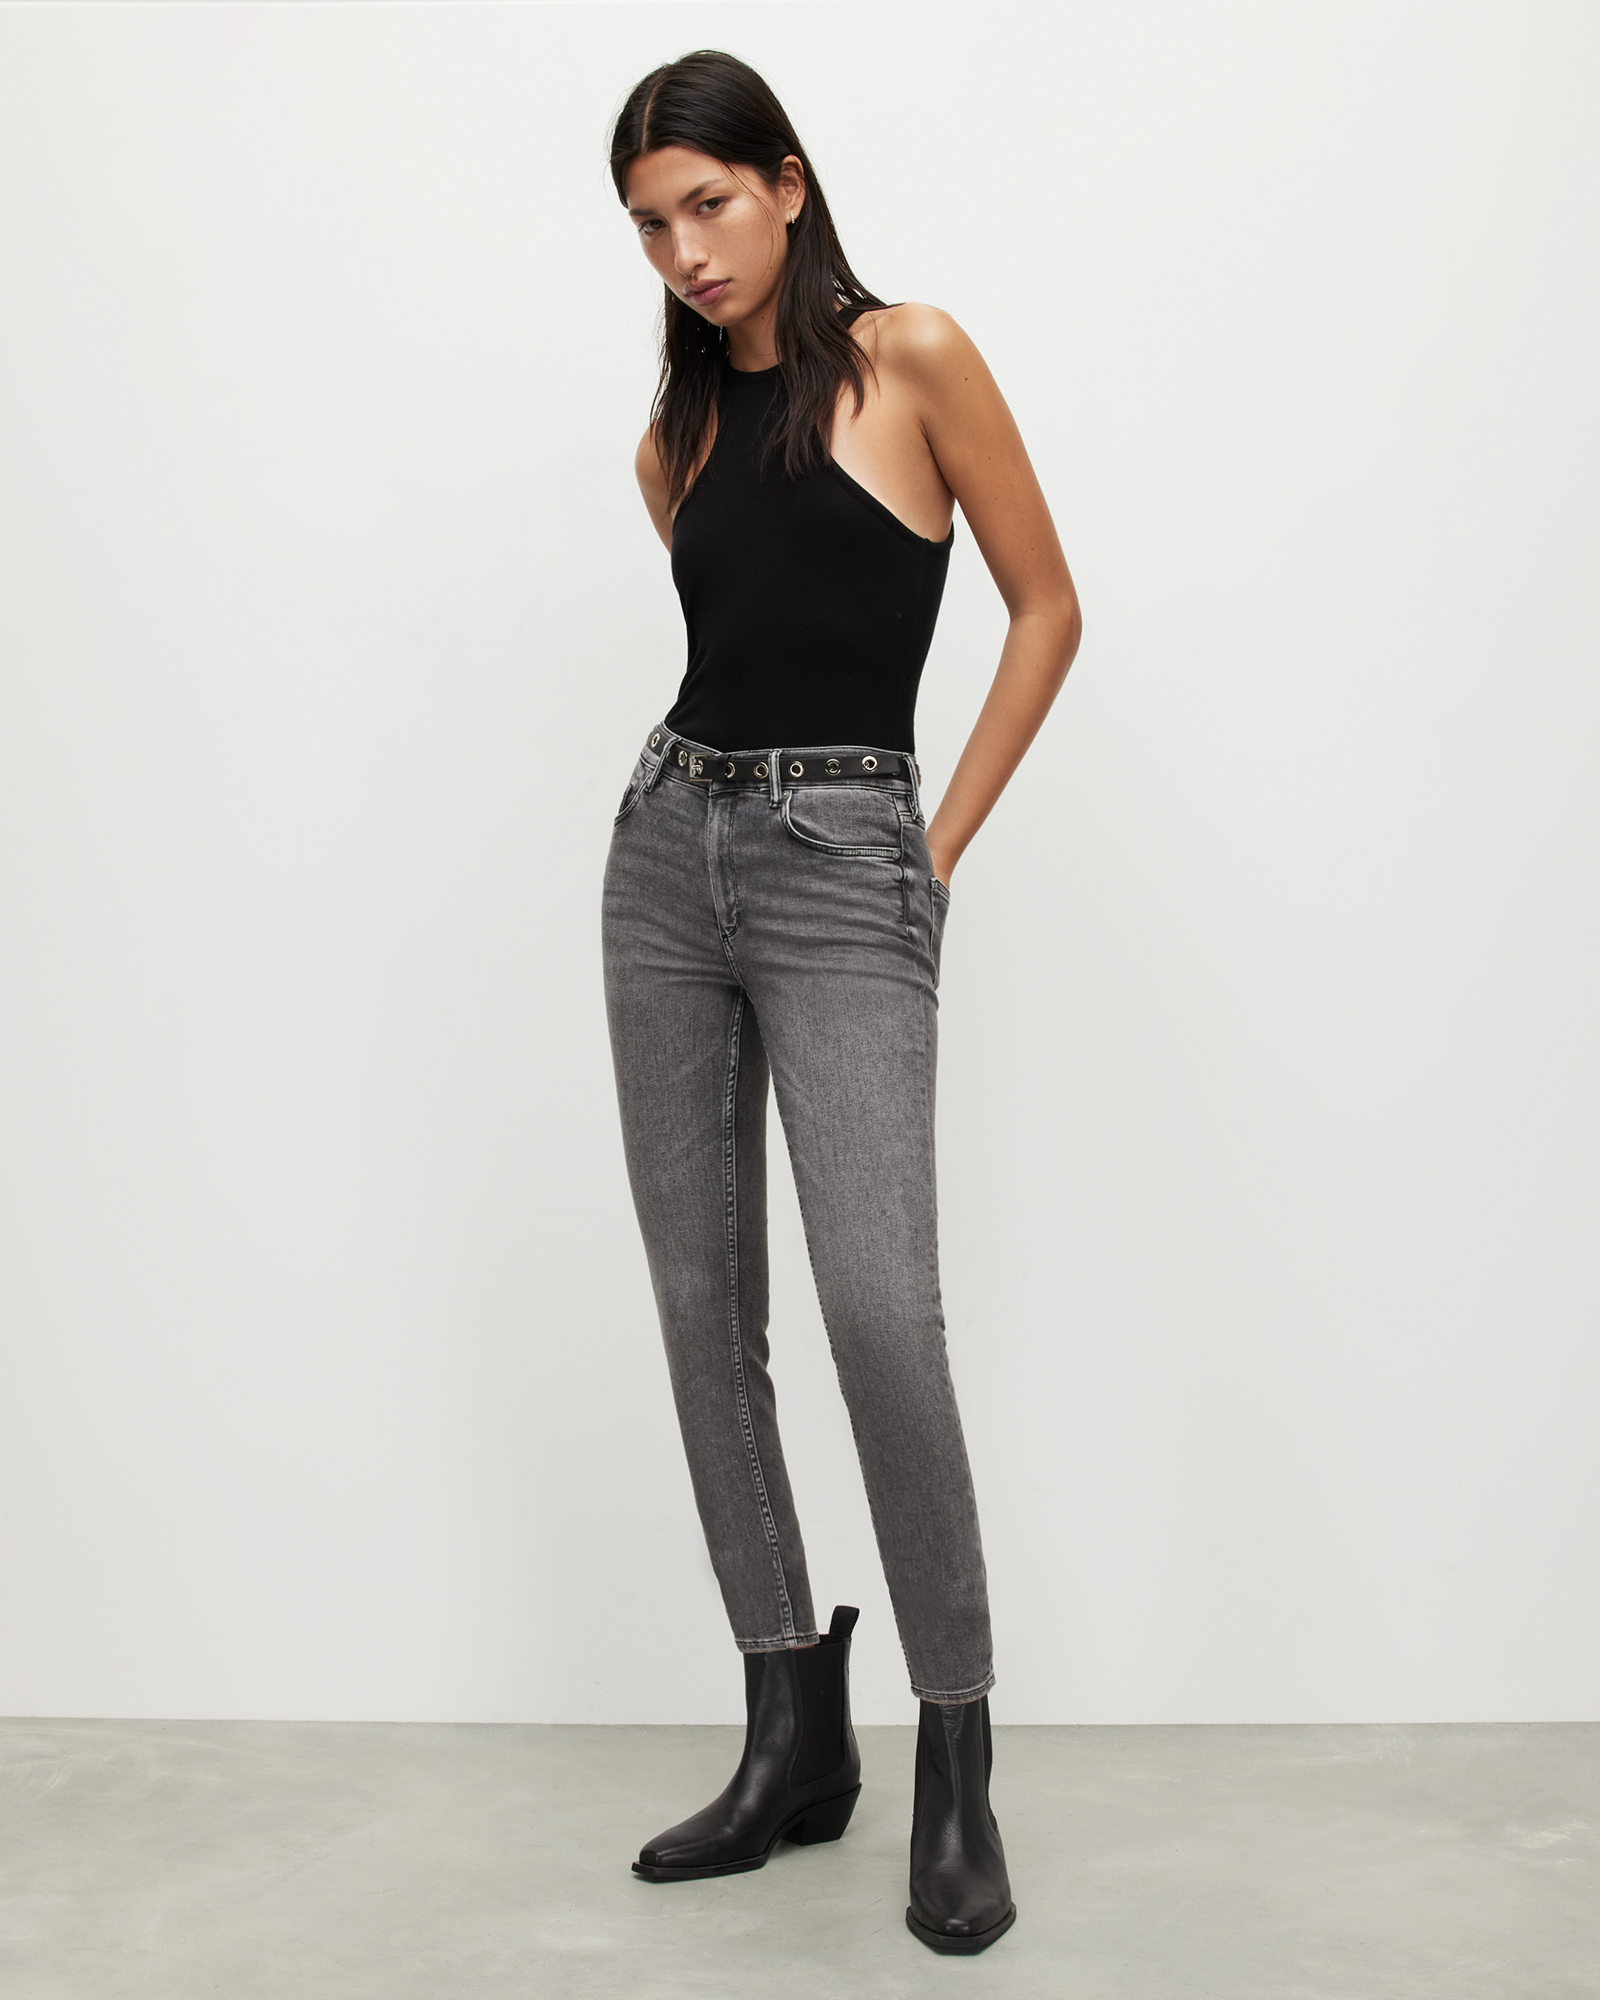 Pockets For Women - AllSaints Dax High-Rise Skinny Jeans